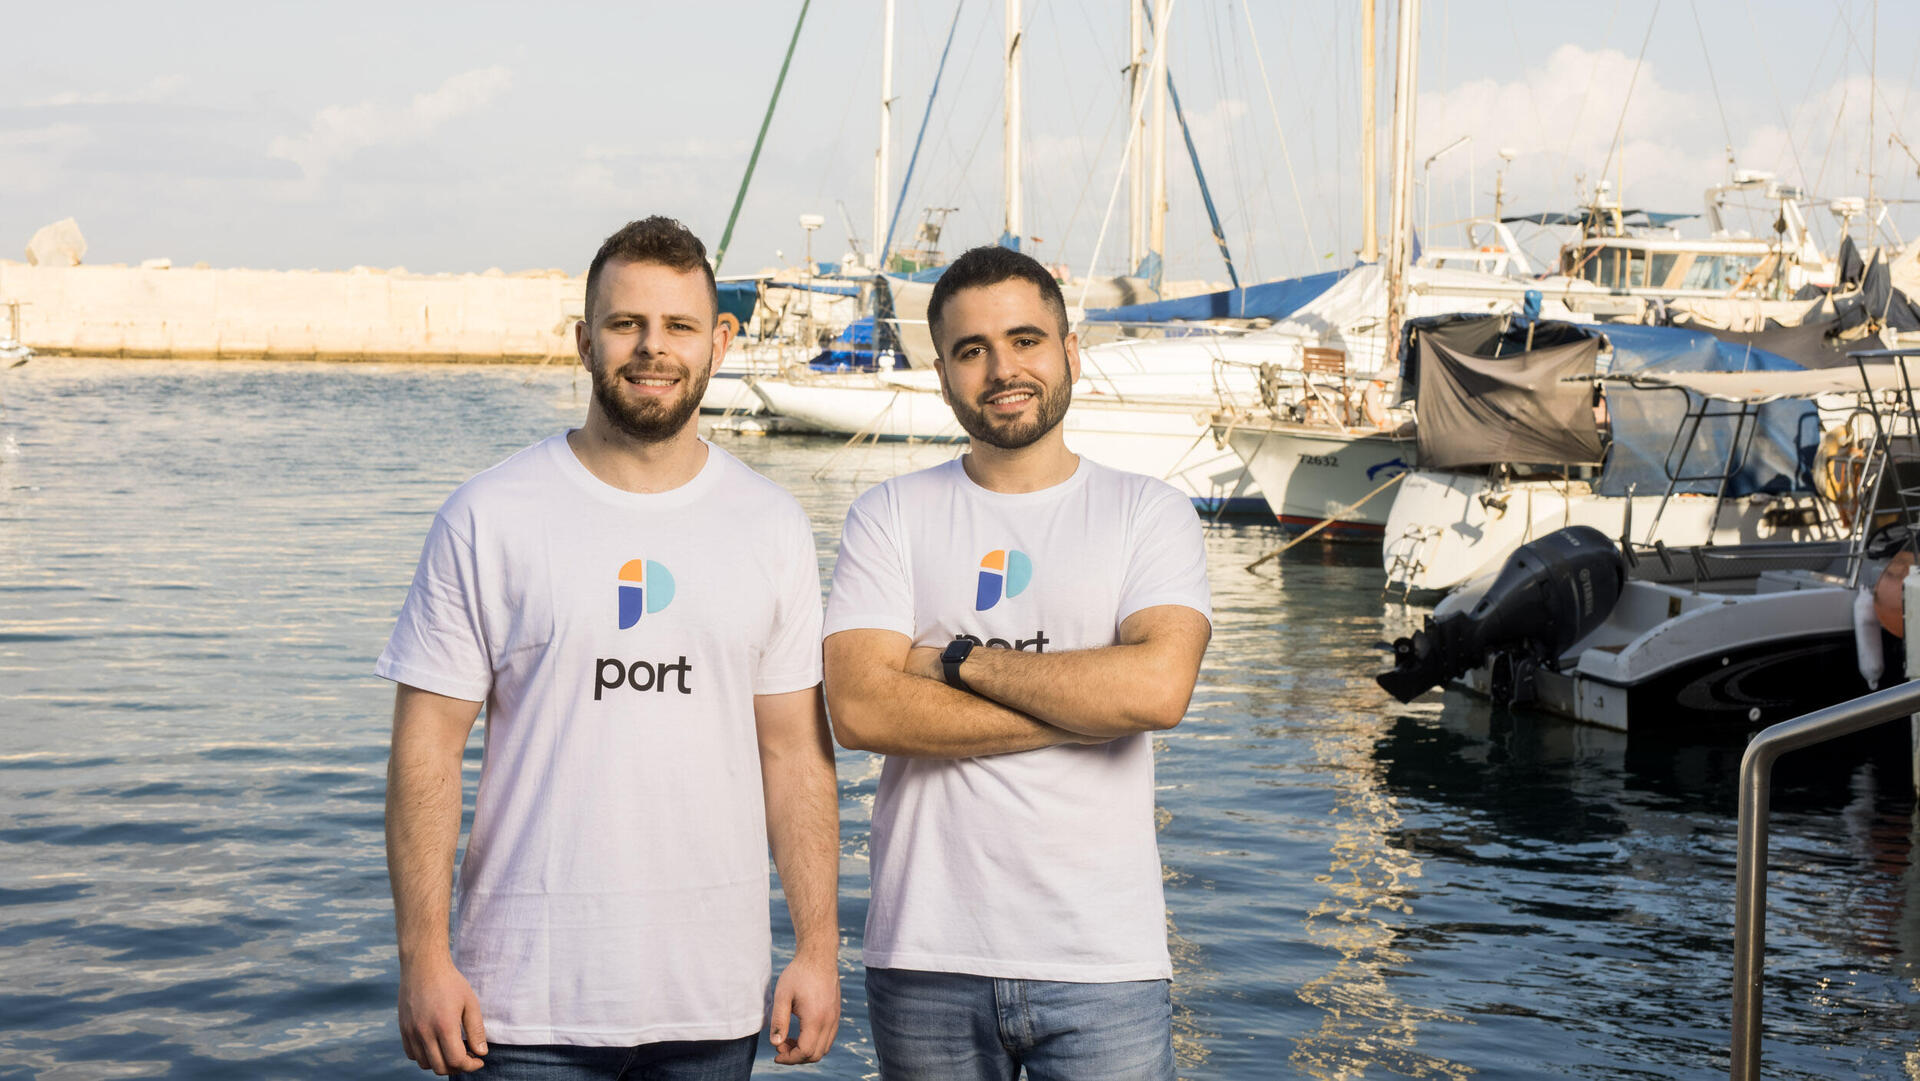 Port co-founders